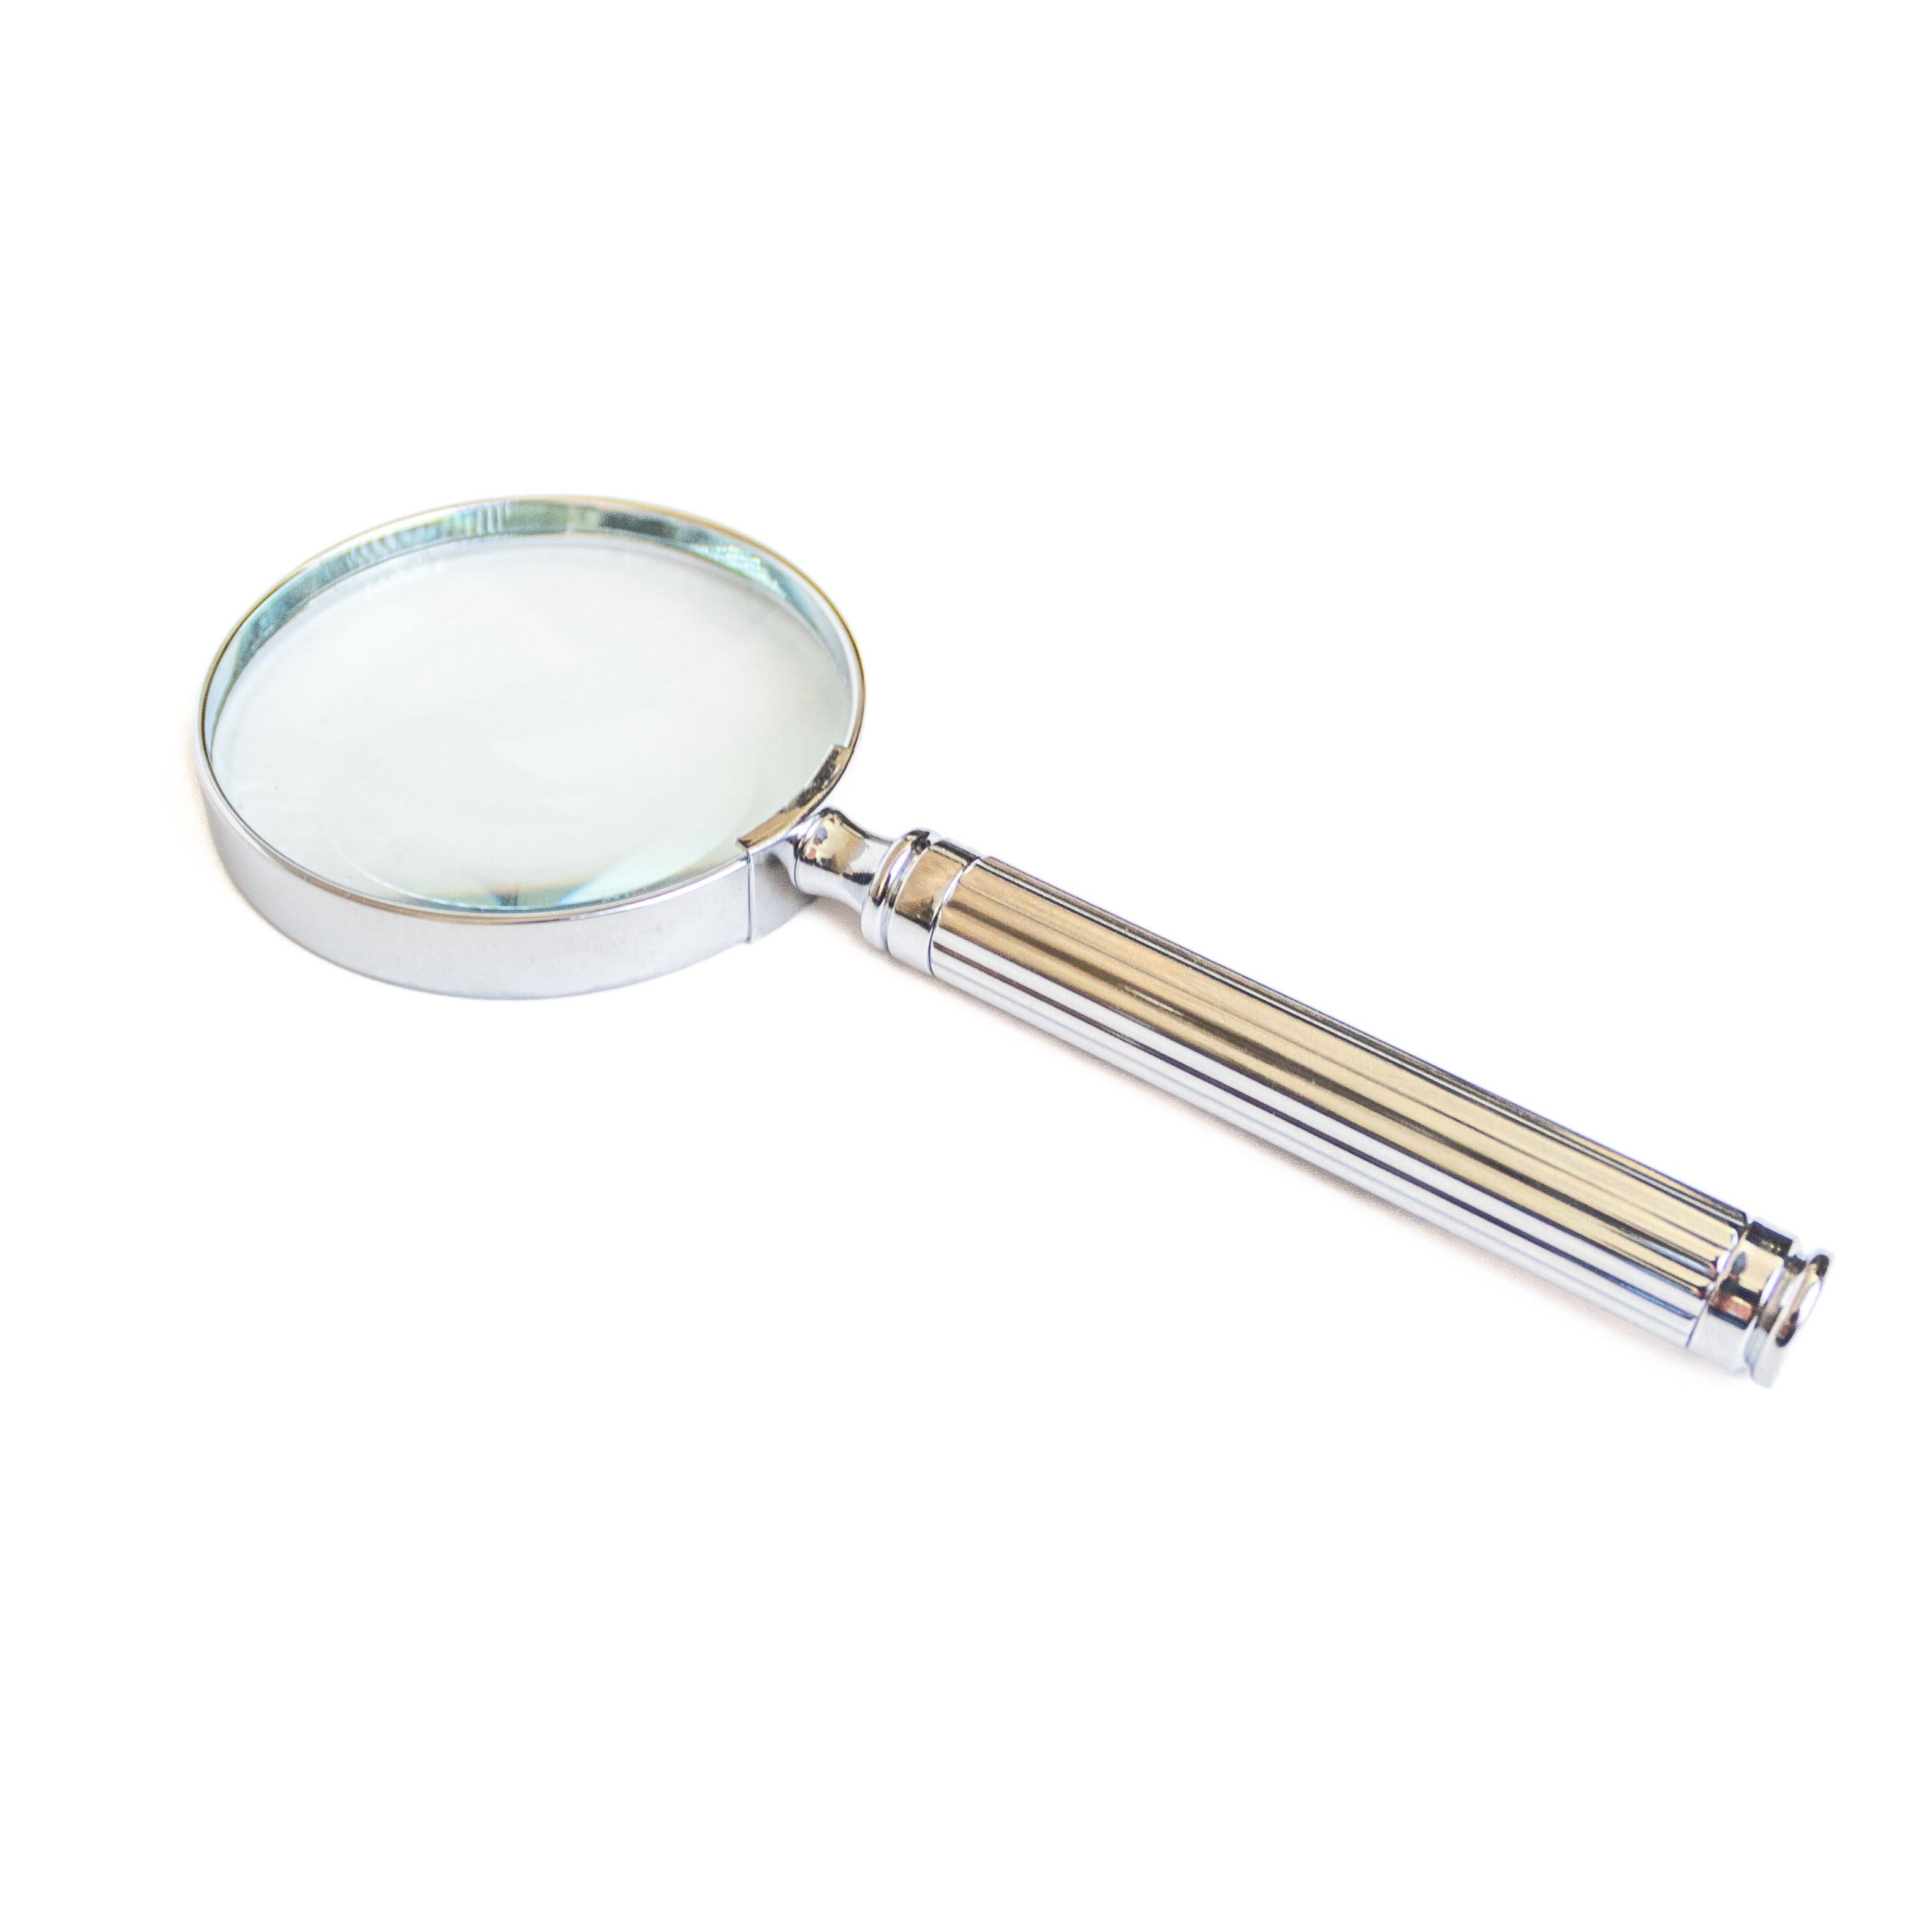 El Casco M-675 Chrome Plated Magnifying Glass